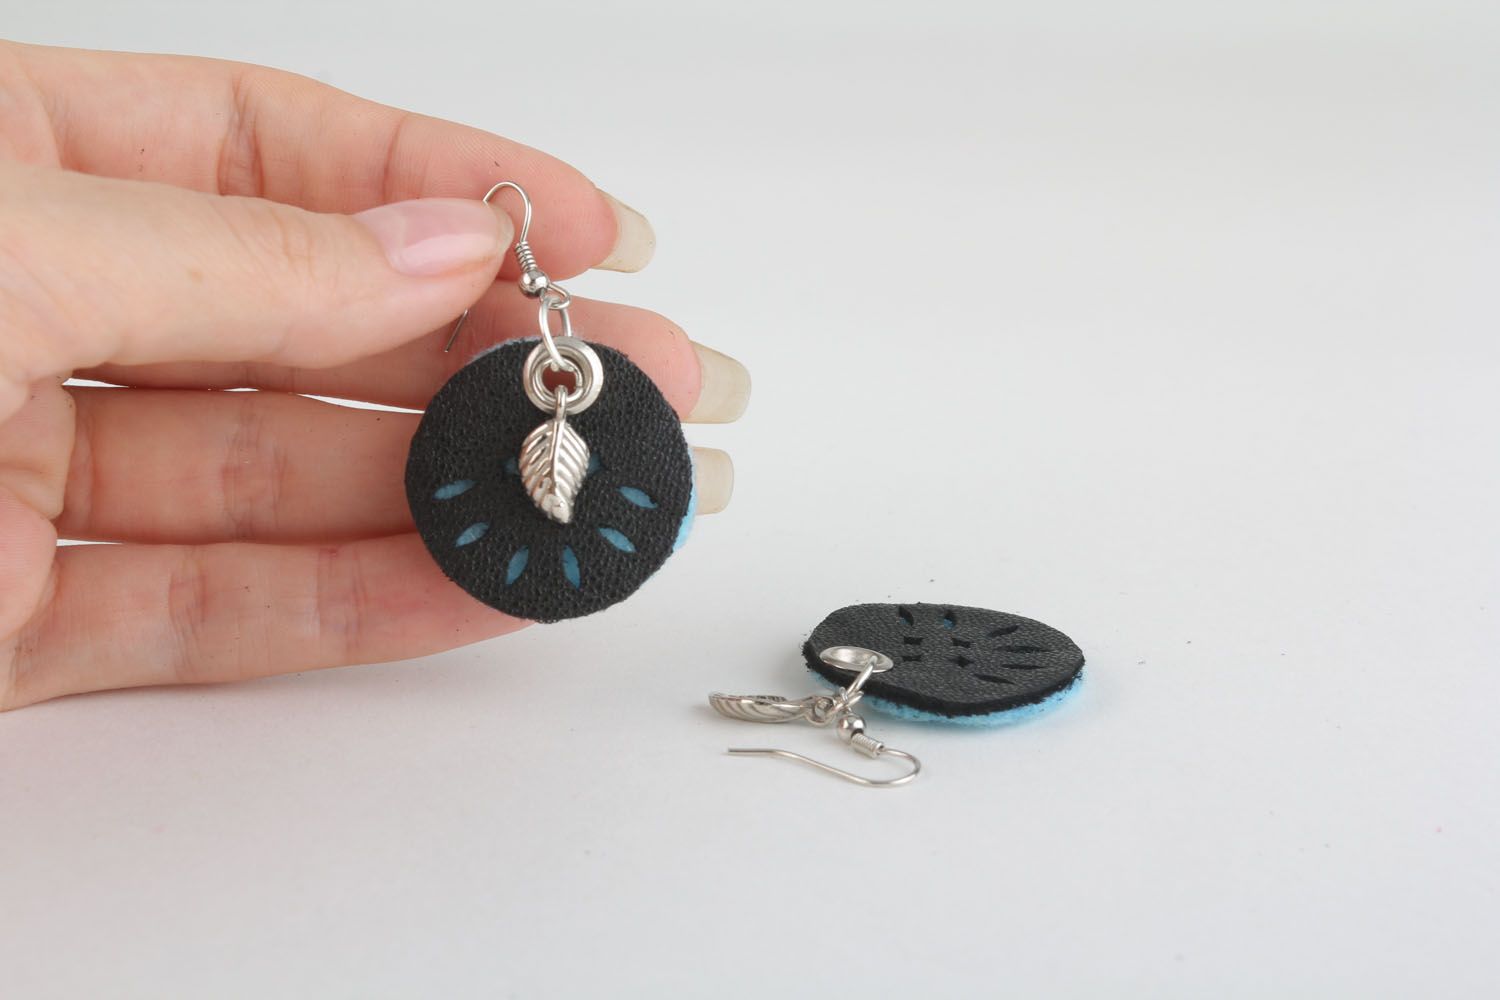 Round earrings made of leather and felt photo 4